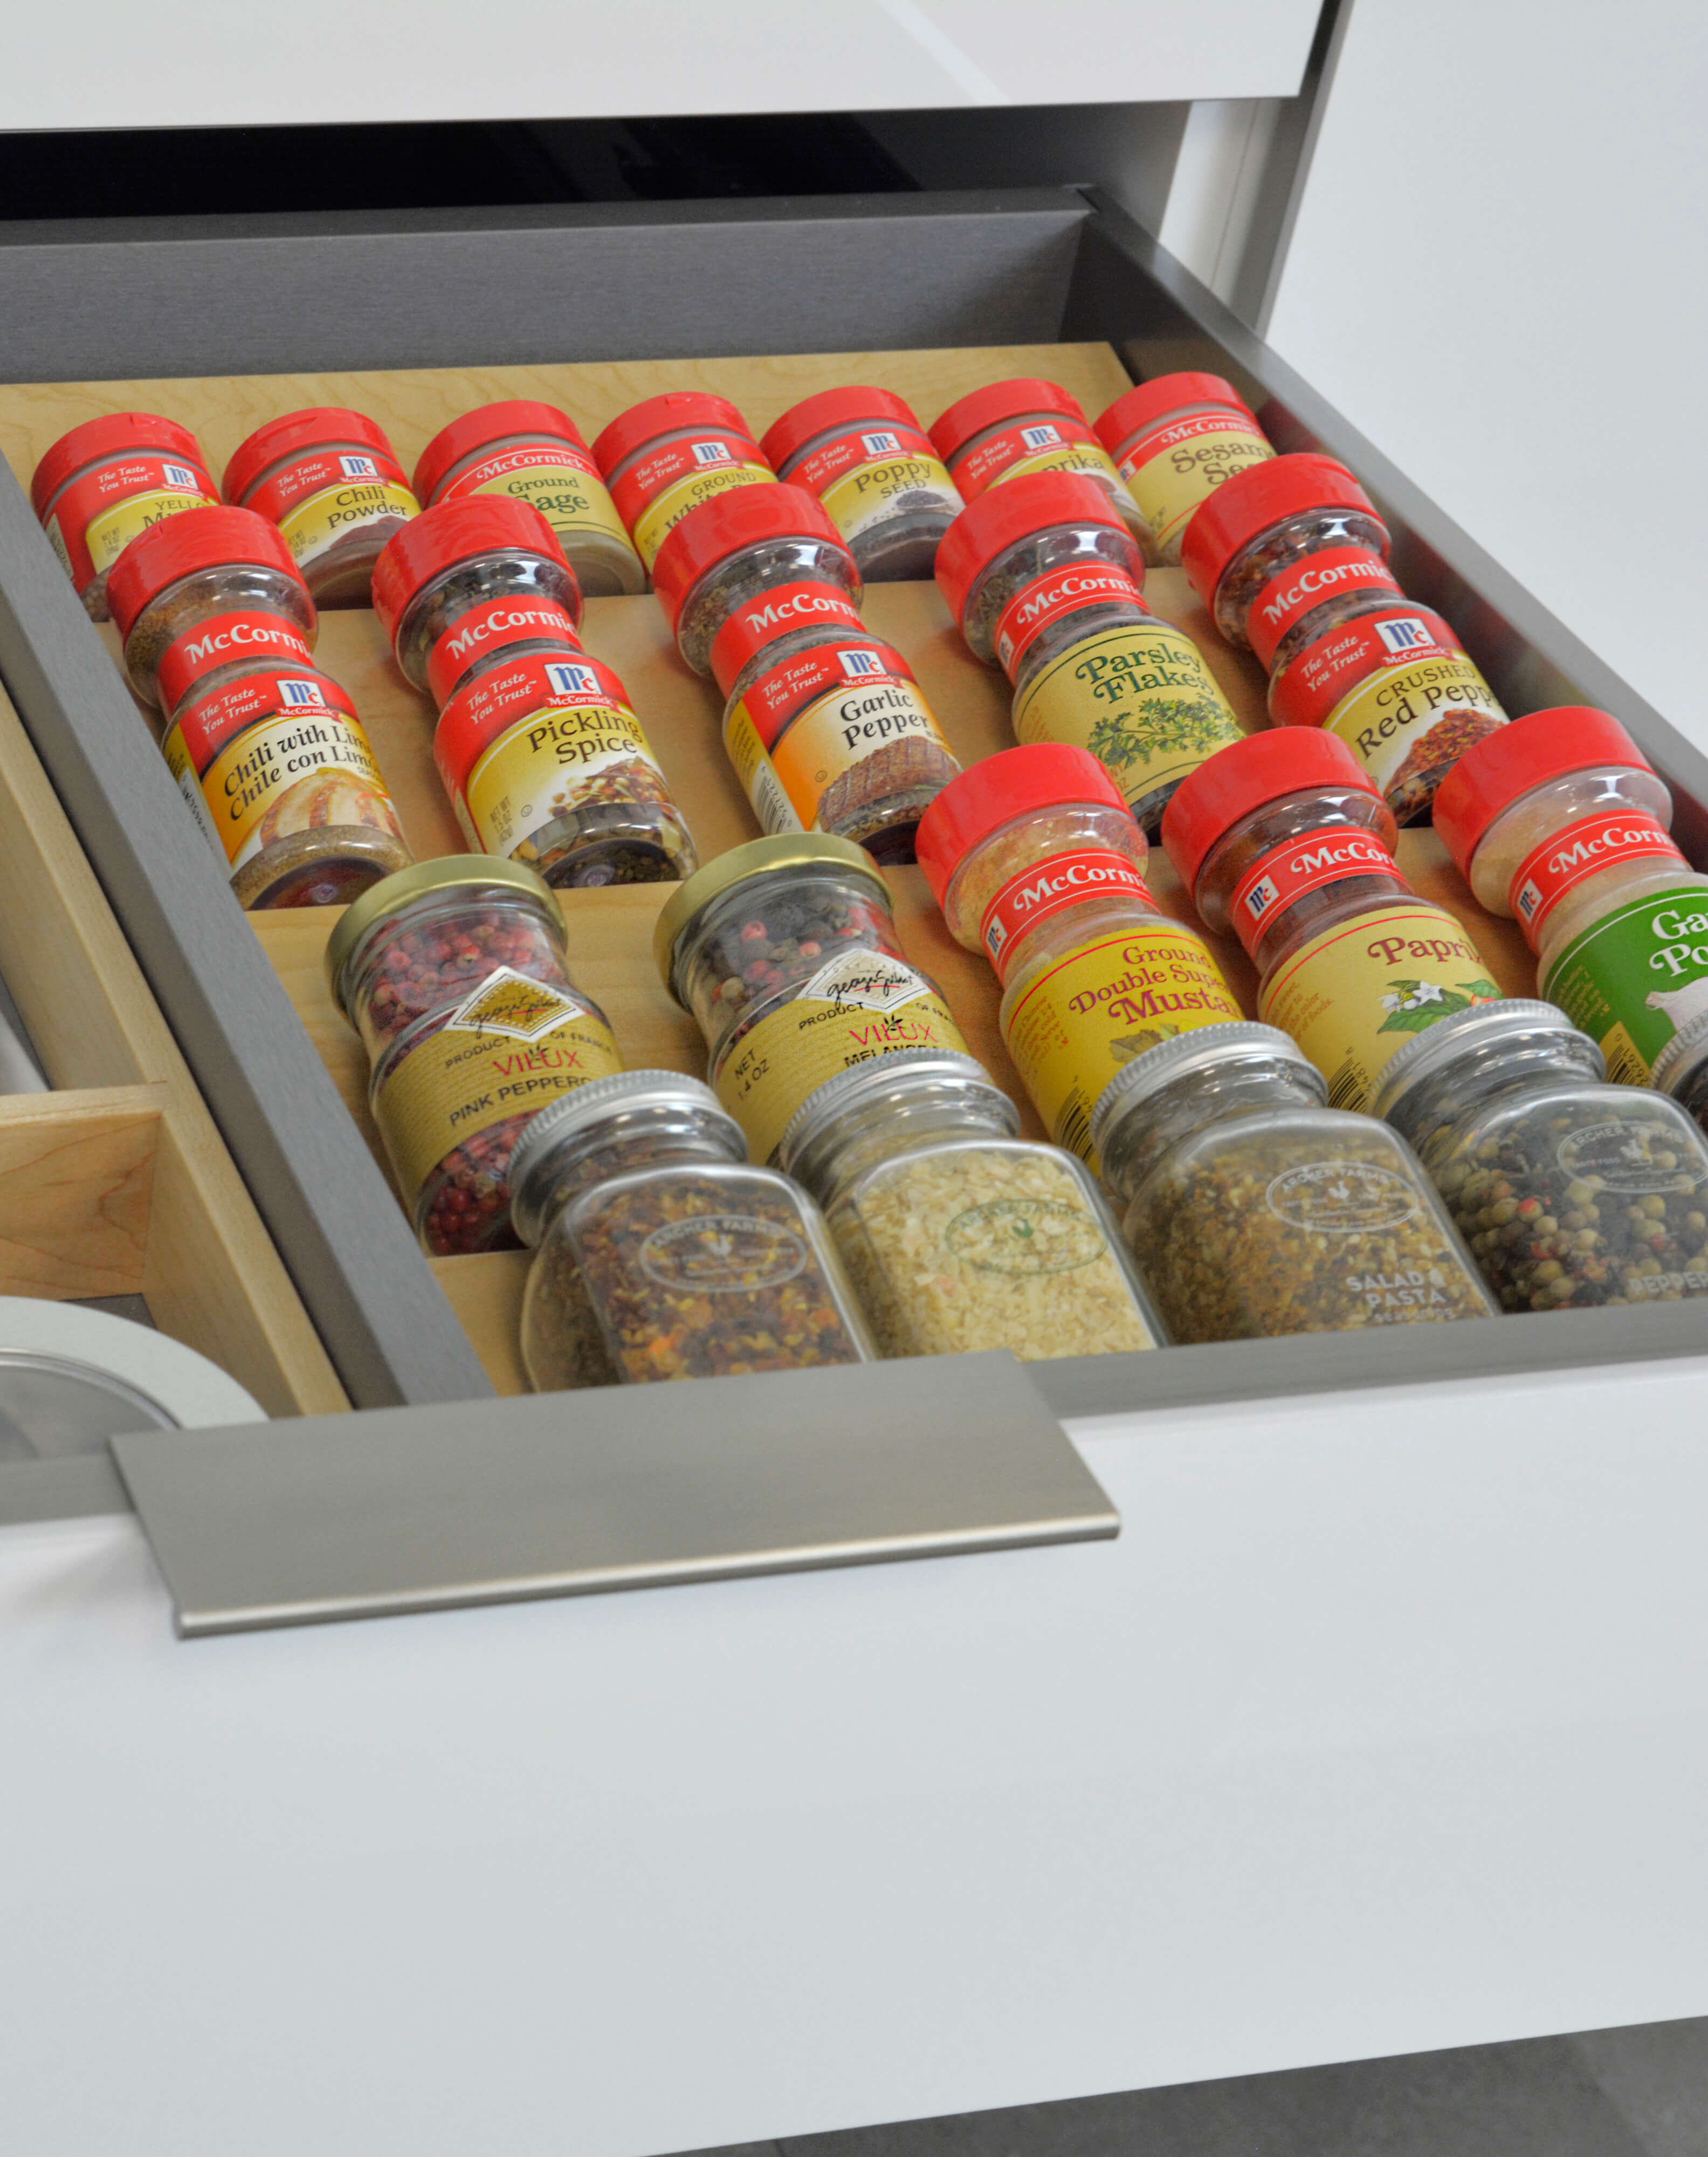 Drawer Spice Rack in a Stainless Steel Drawer